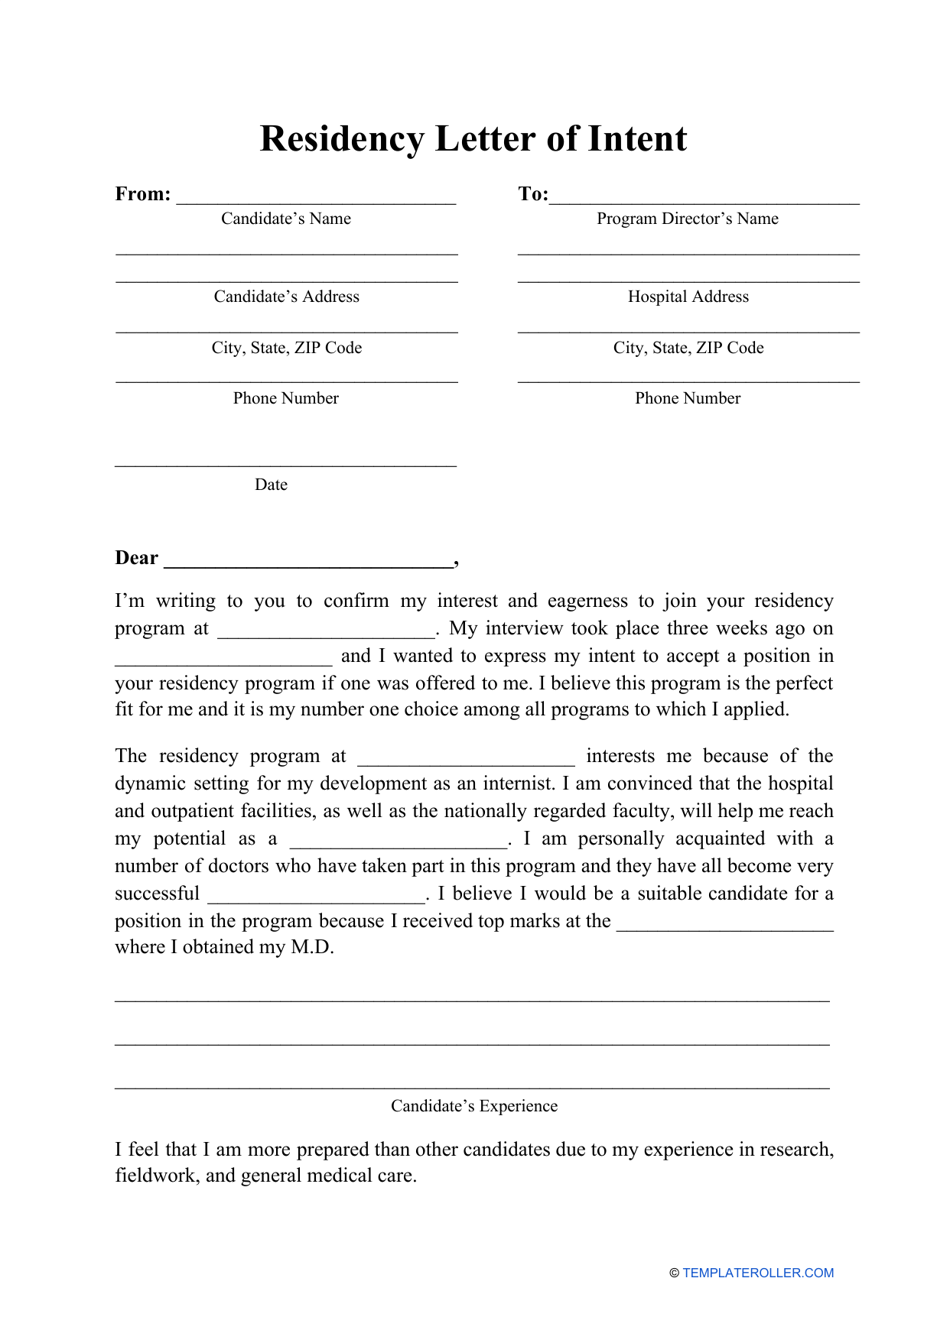 Residency Letter of Intent Template Download Printable PDF Templateroller